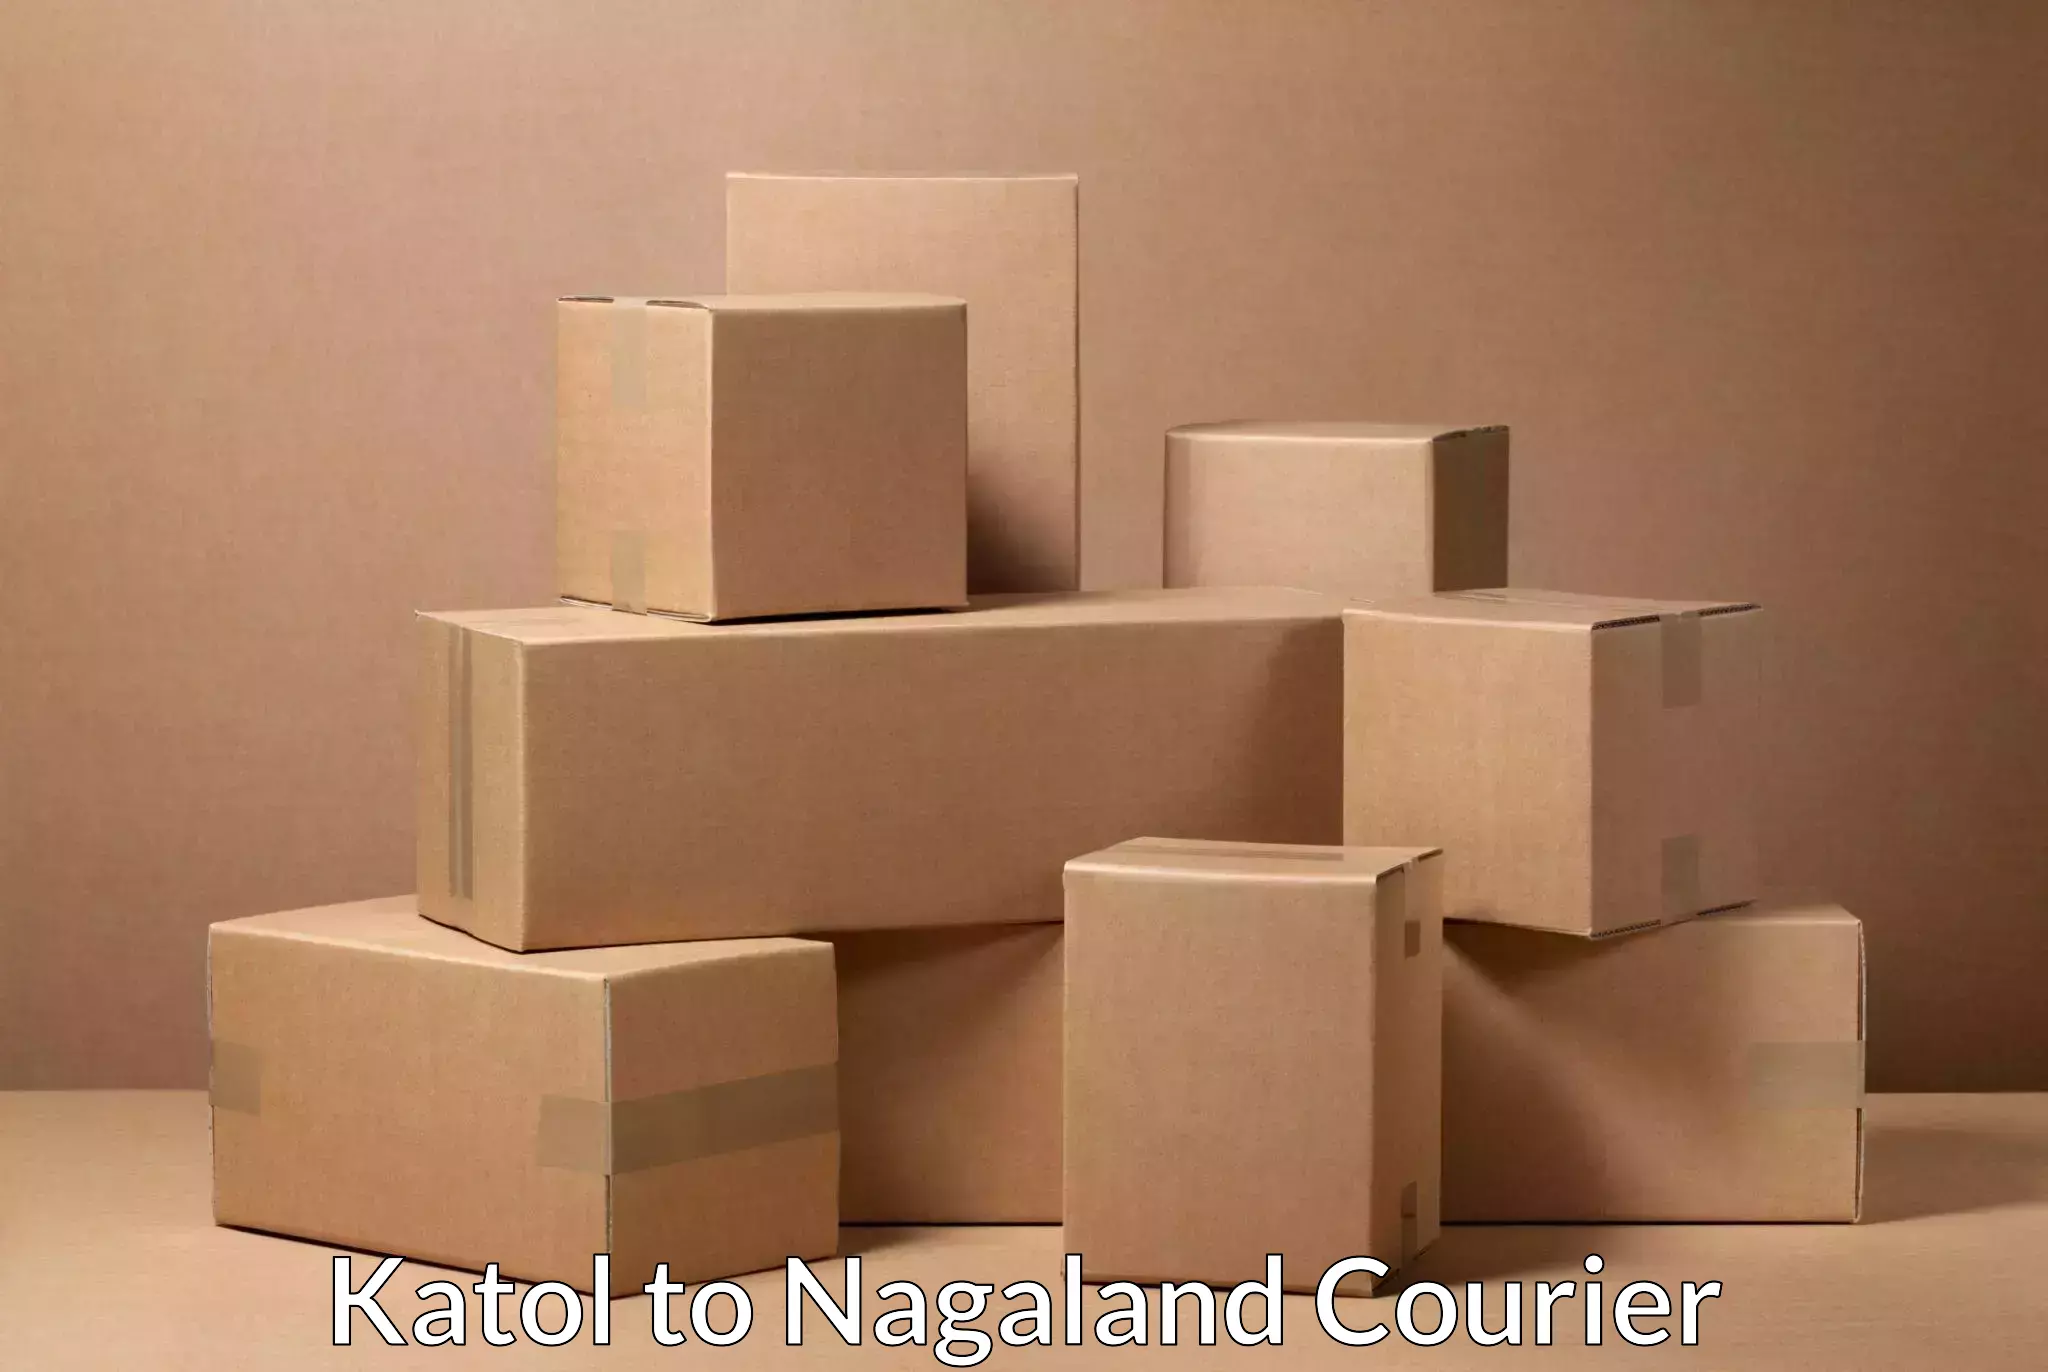 24-hour courier service Katol to Nagaland